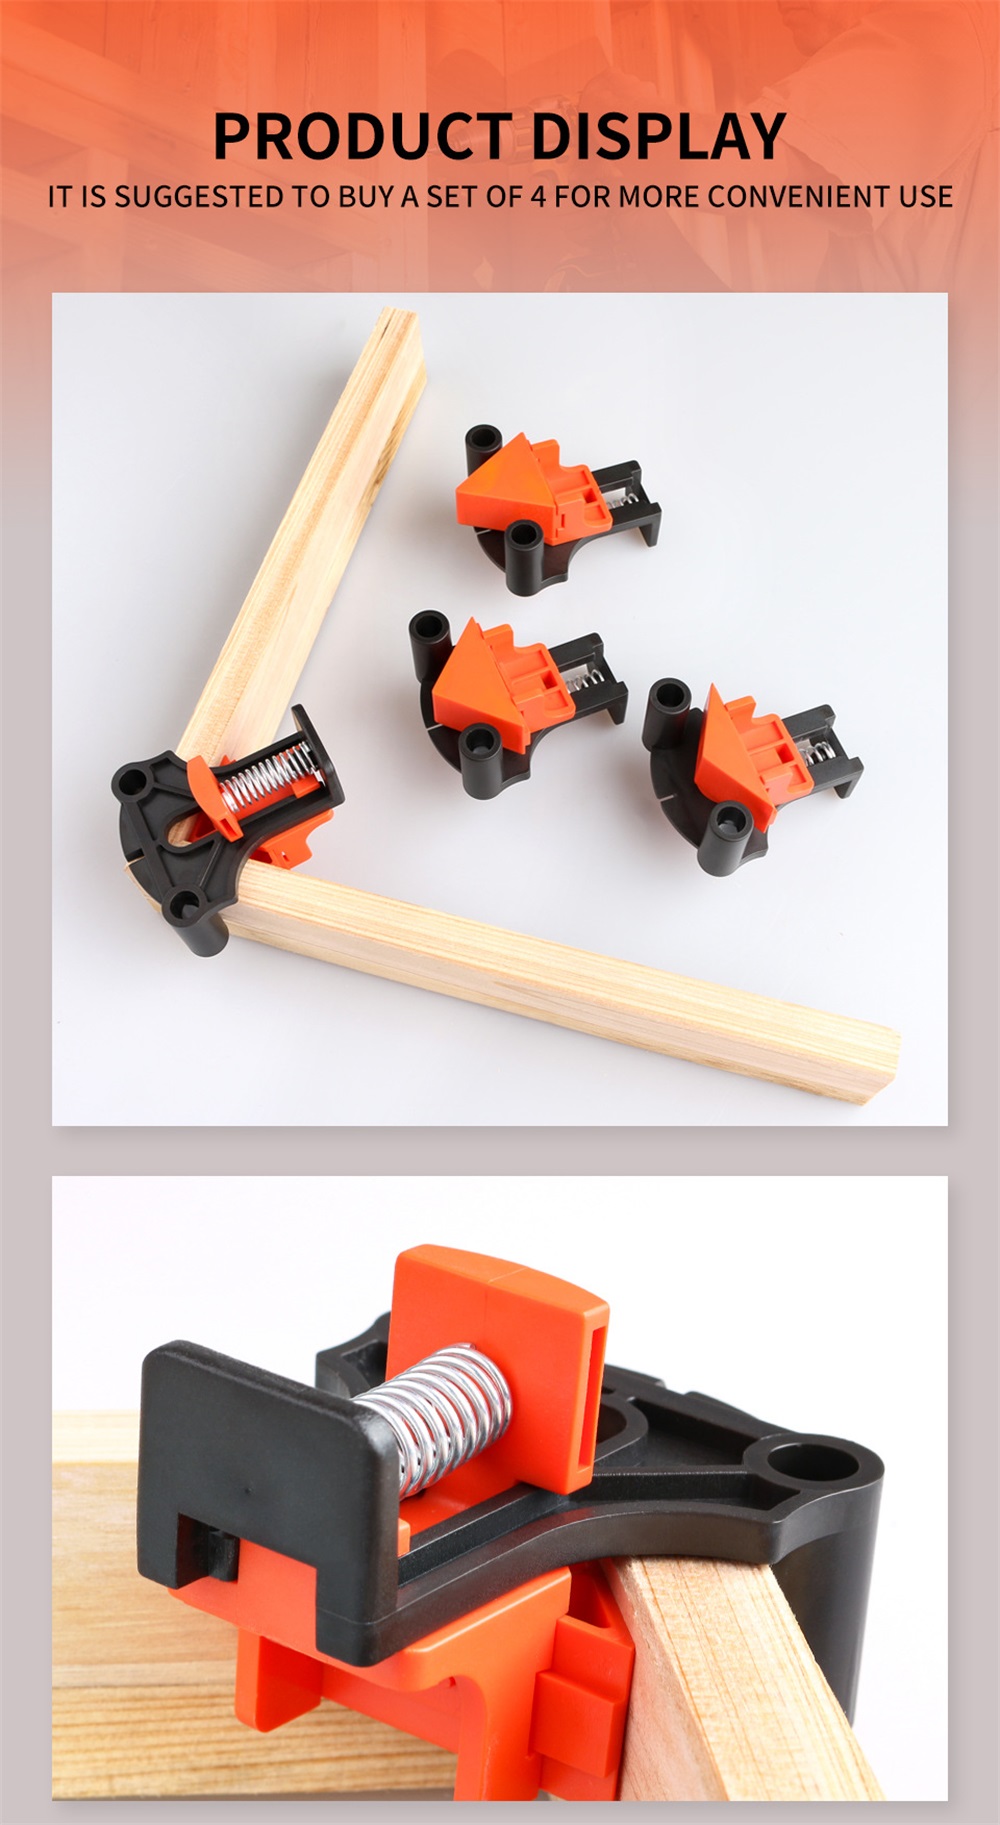 6090120-Degree-Right-Angle-Clamp-Angle-Mate-Woodworking-Hand-Fixing-Clips-Picture-Frame-Corner-Clip--1848026-7